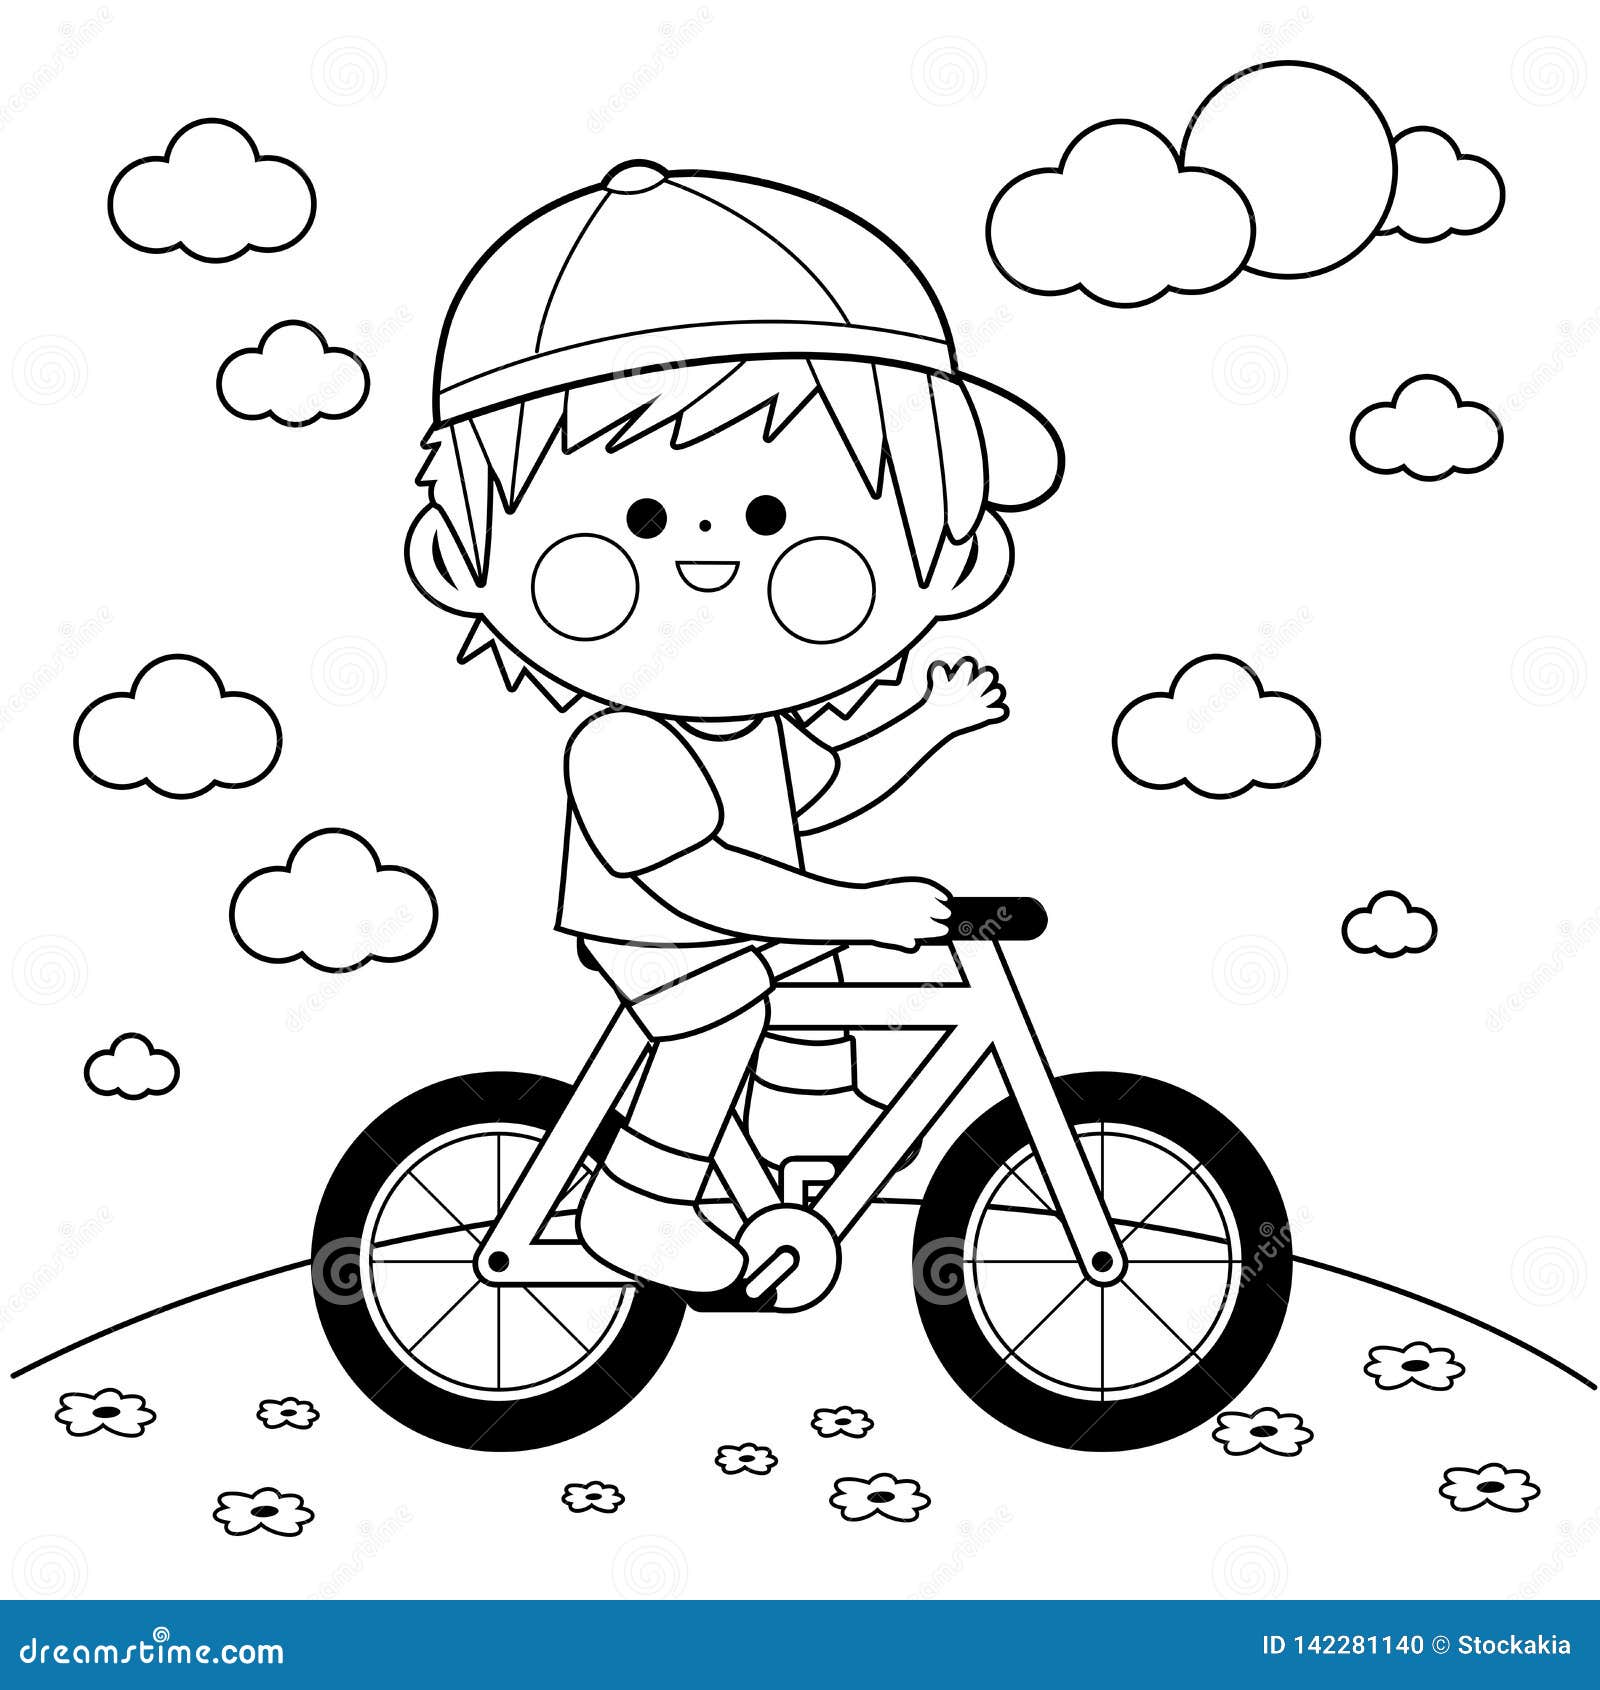 Boy Riding a Bicycle at the Park. Black and White Coloring Book Page